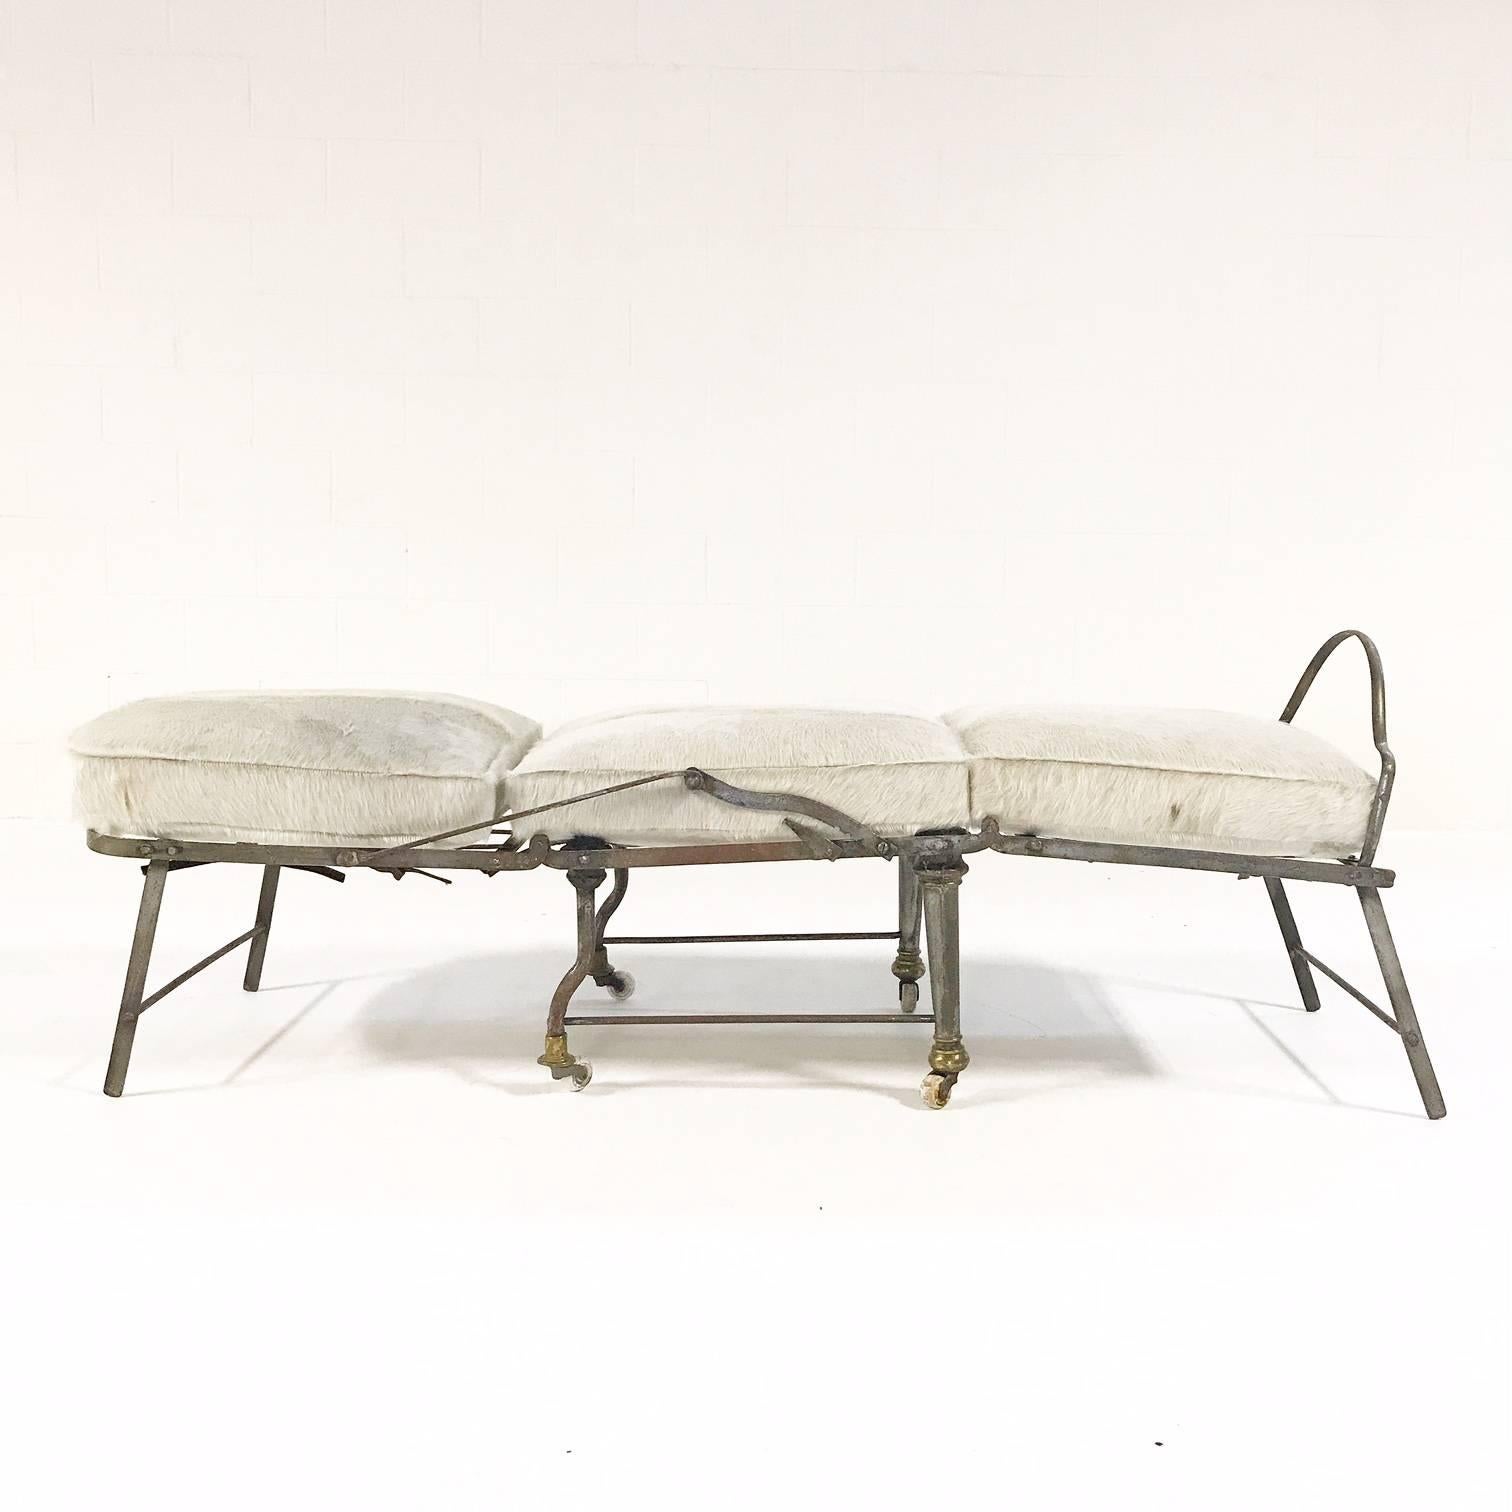 A beautiful antique metal campaign chaise lounge from France. The chaise can be positioned into three different positions - as a chair, a traditional chaise, and a flat daybed. We custom made three cushions from our gorgeous ivory cowhide. Each